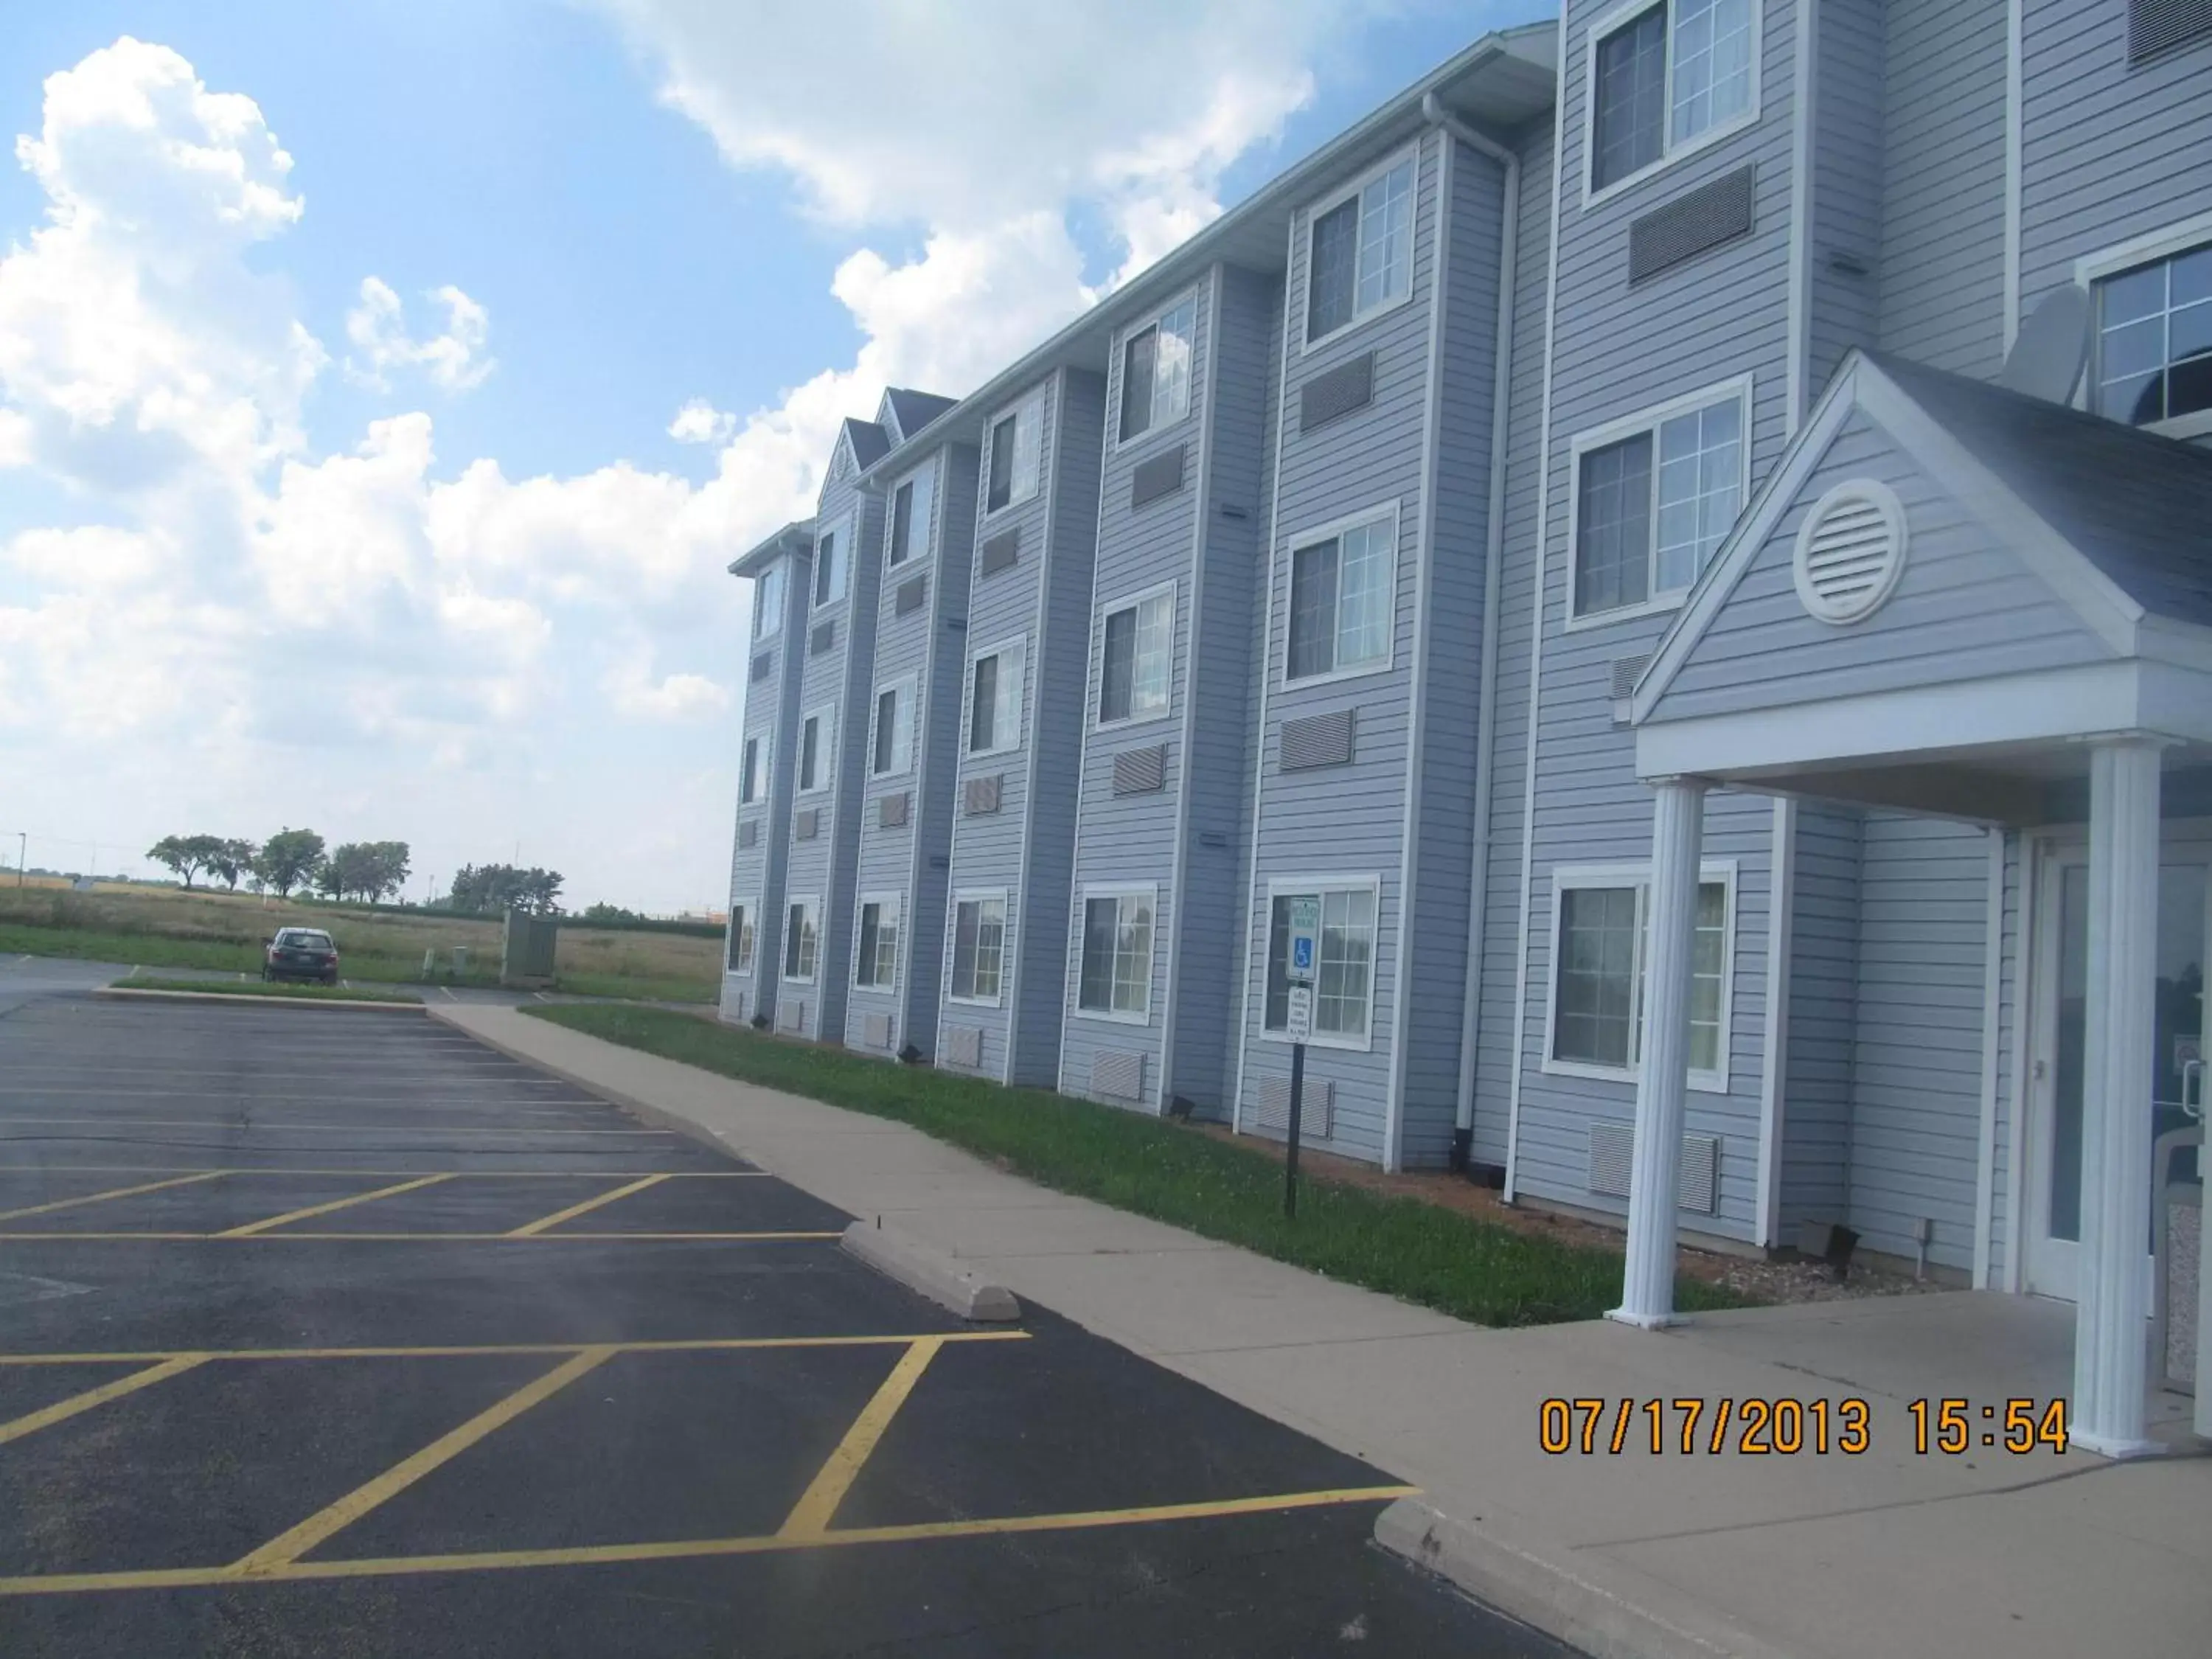 Property Building in Microtel Inn by Wyndham Champaign